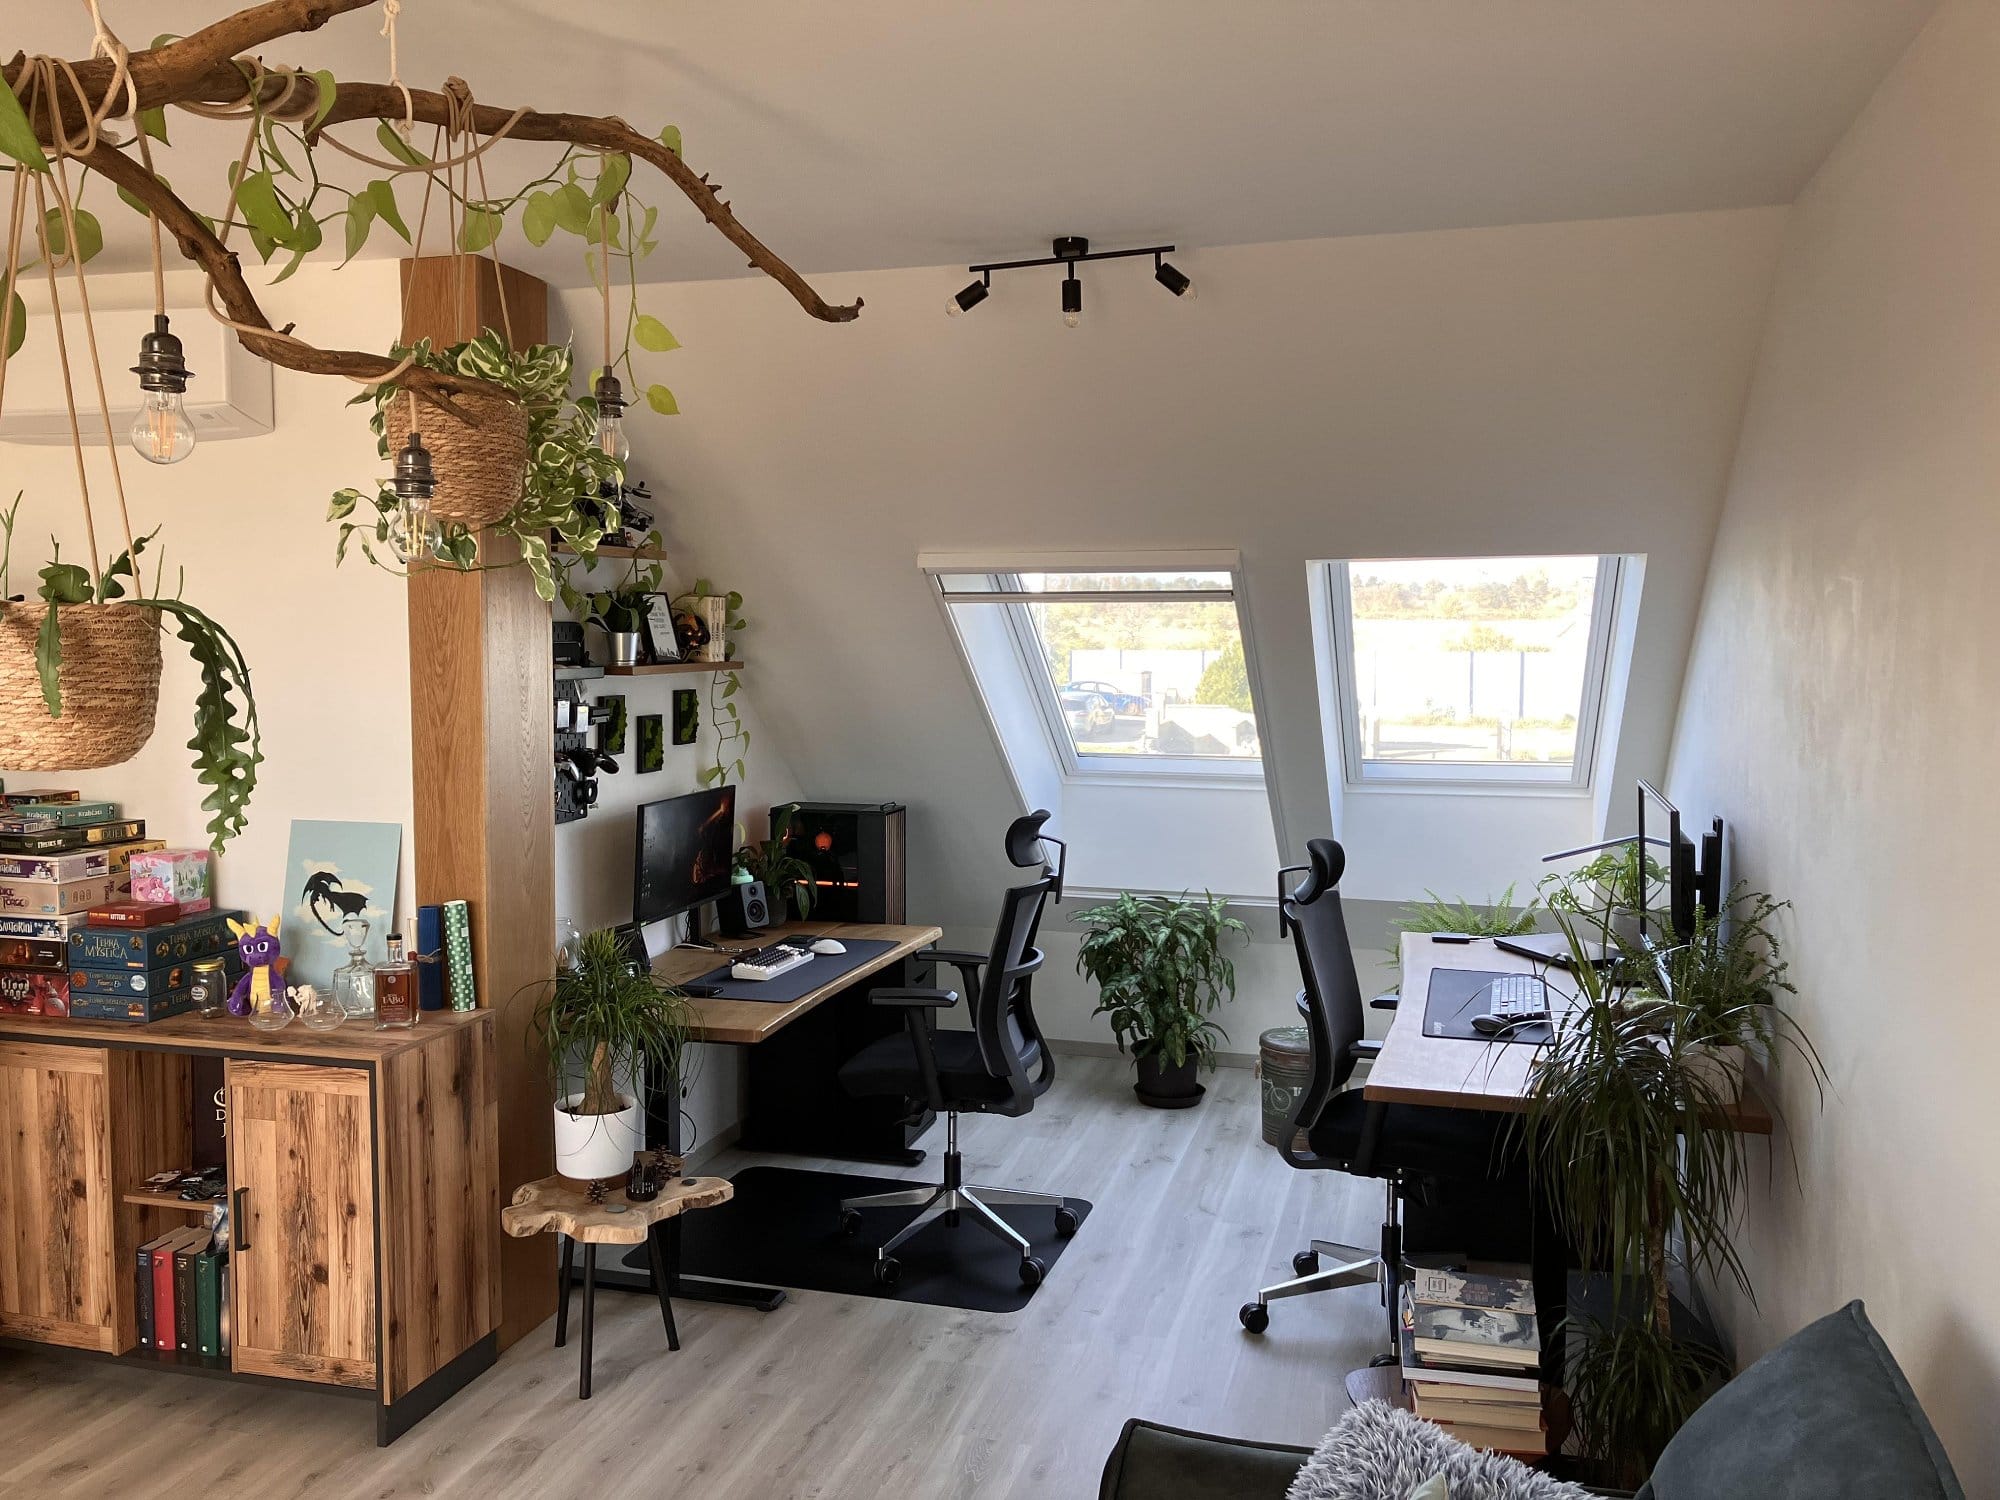 A cosy home office with two desks and ergonomic chairs, surrounded by plants and natural light from large windows, featuring a wooden cabinet with board games and hanging plants on a branch